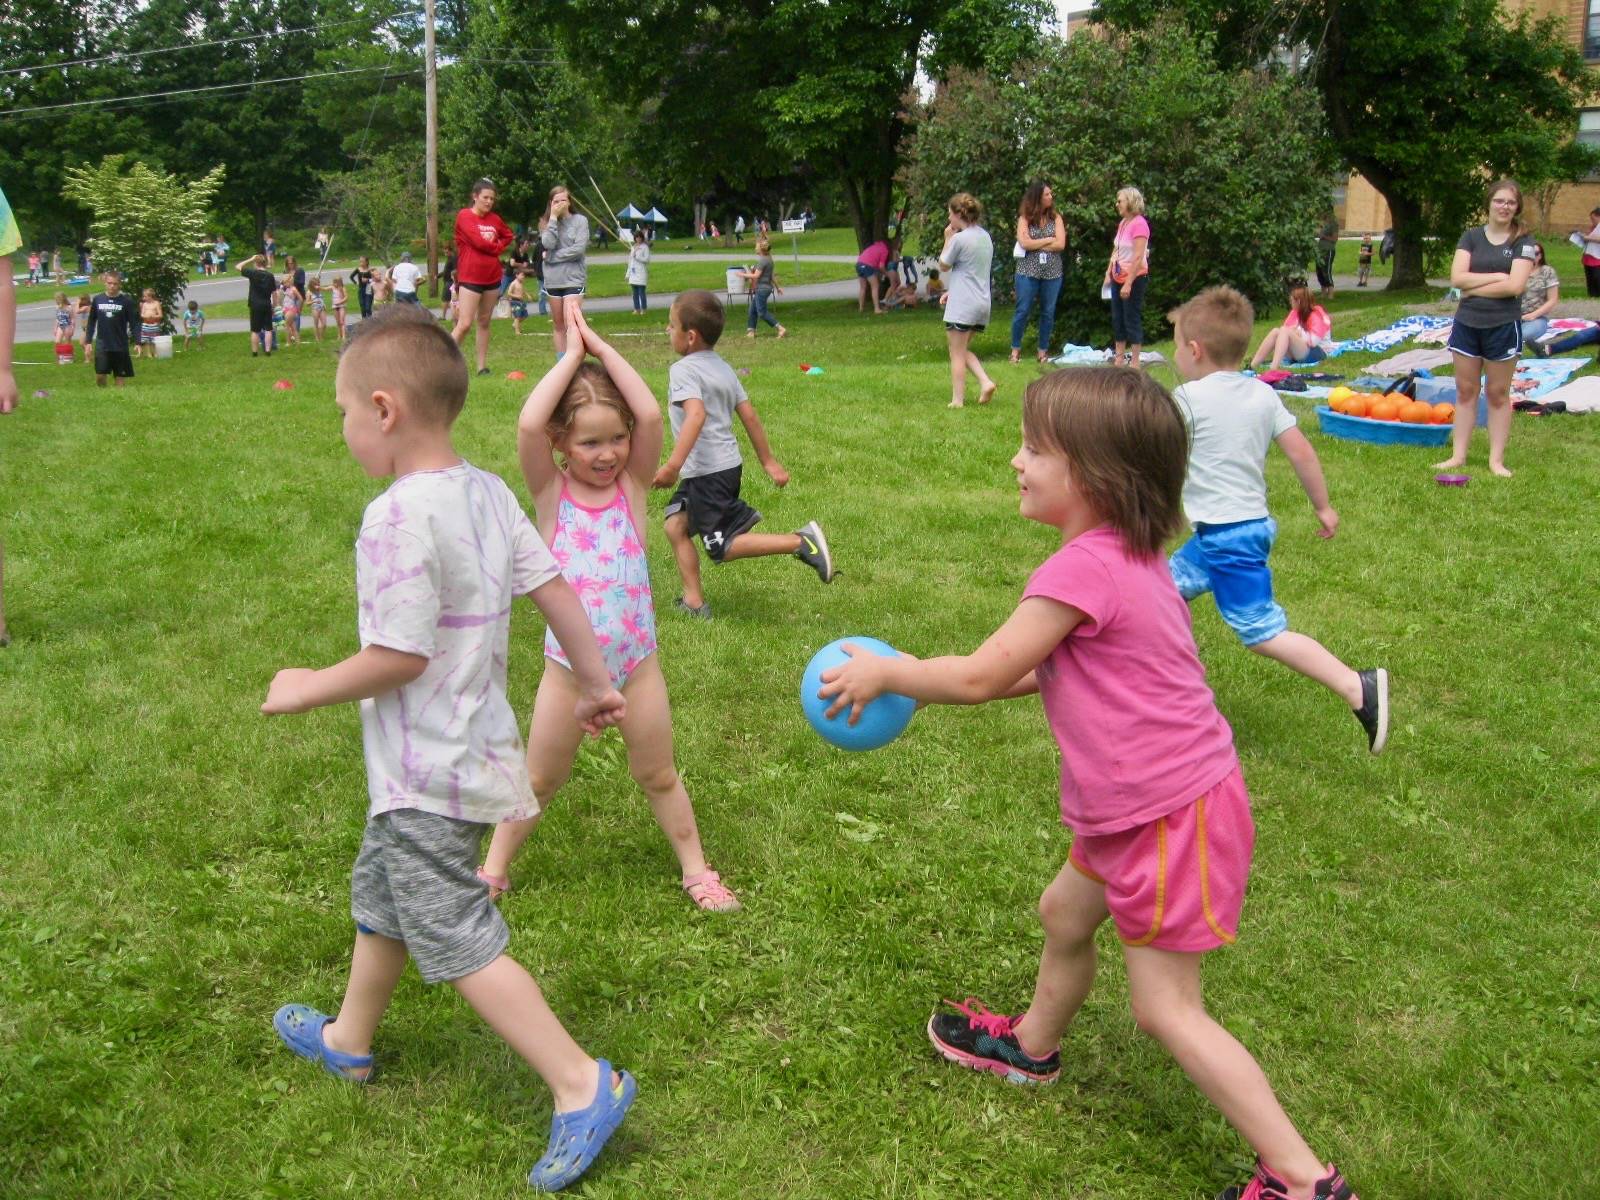 Students play tag with a ball.